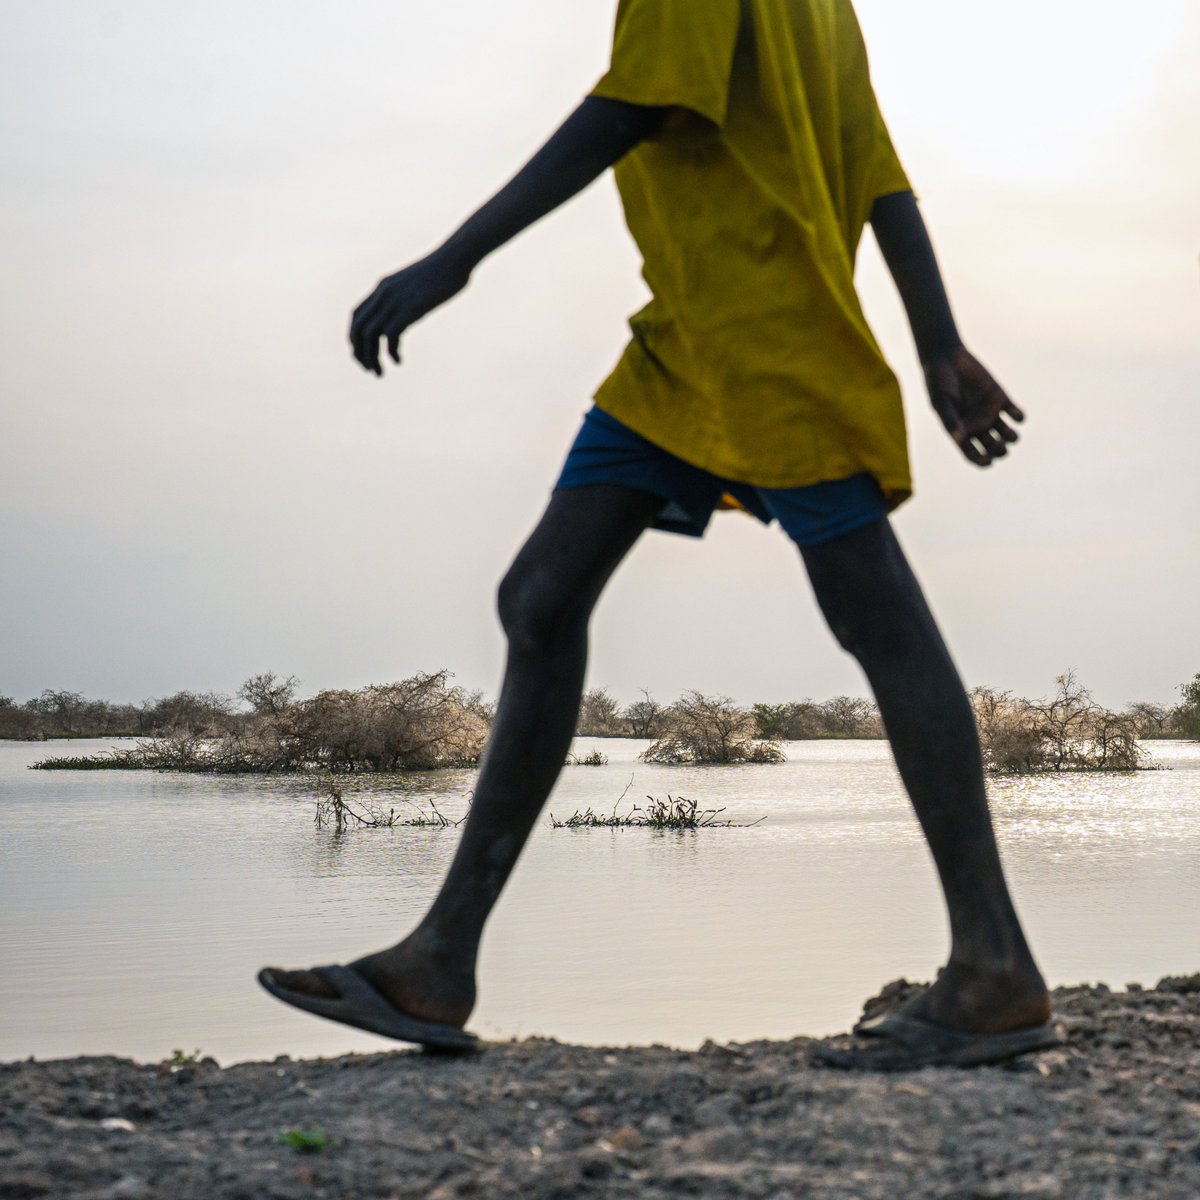 #Flooding Water scarcity Heatwaves Vector-borne diseases Every child has been exposed to at least one of these #climate disasters. We must protect children and the services they rely on. #SSOT